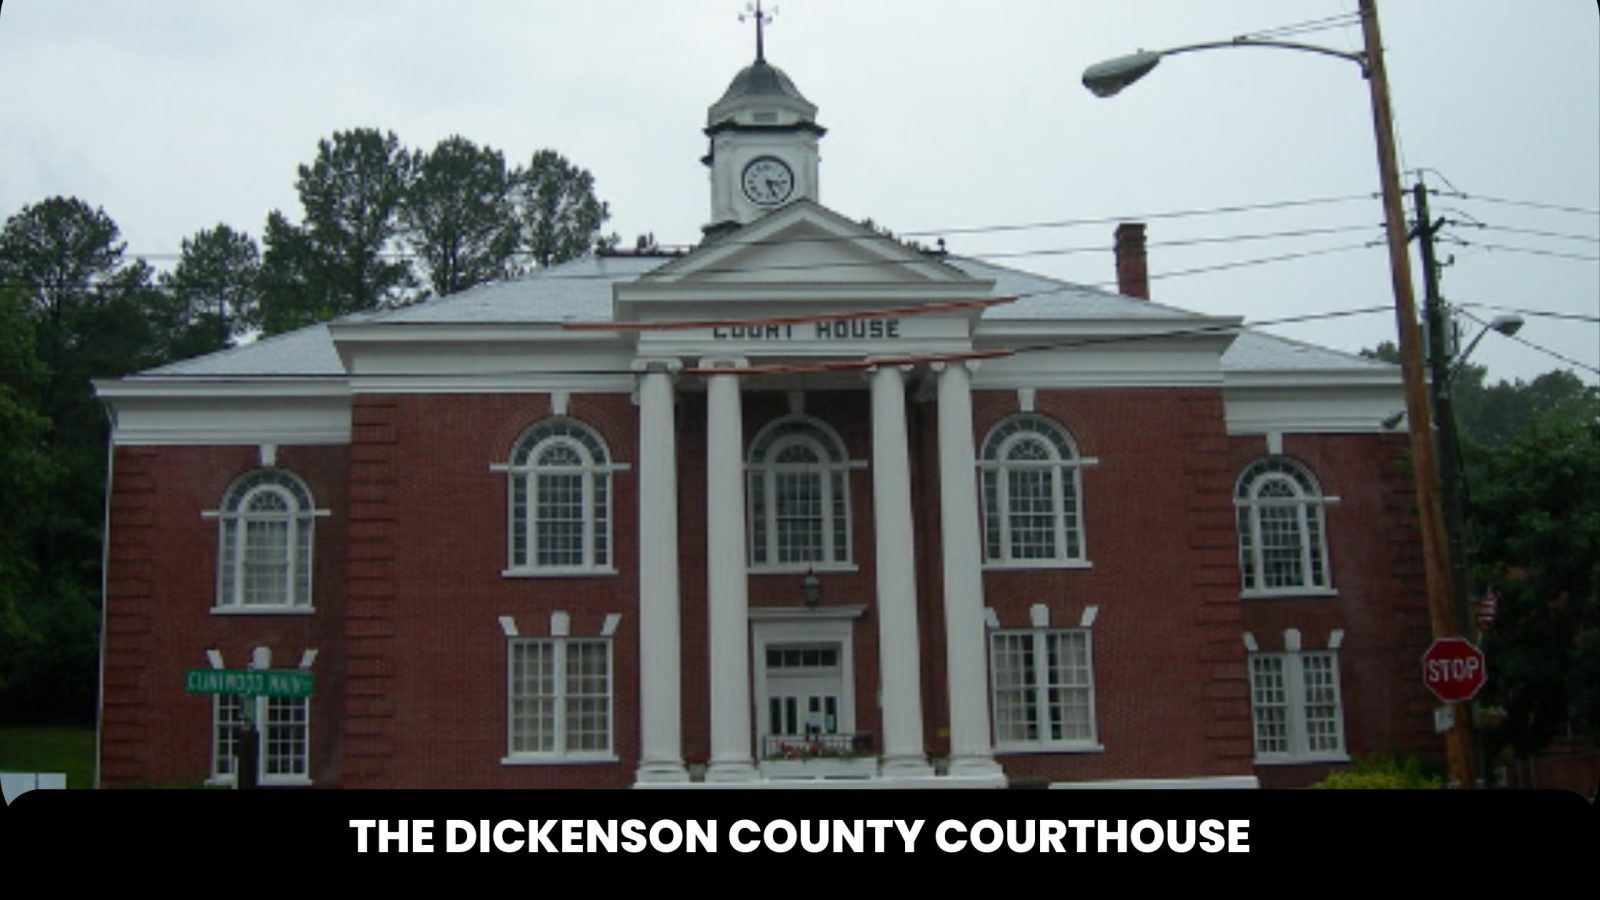 The Dickenson County Courthouse